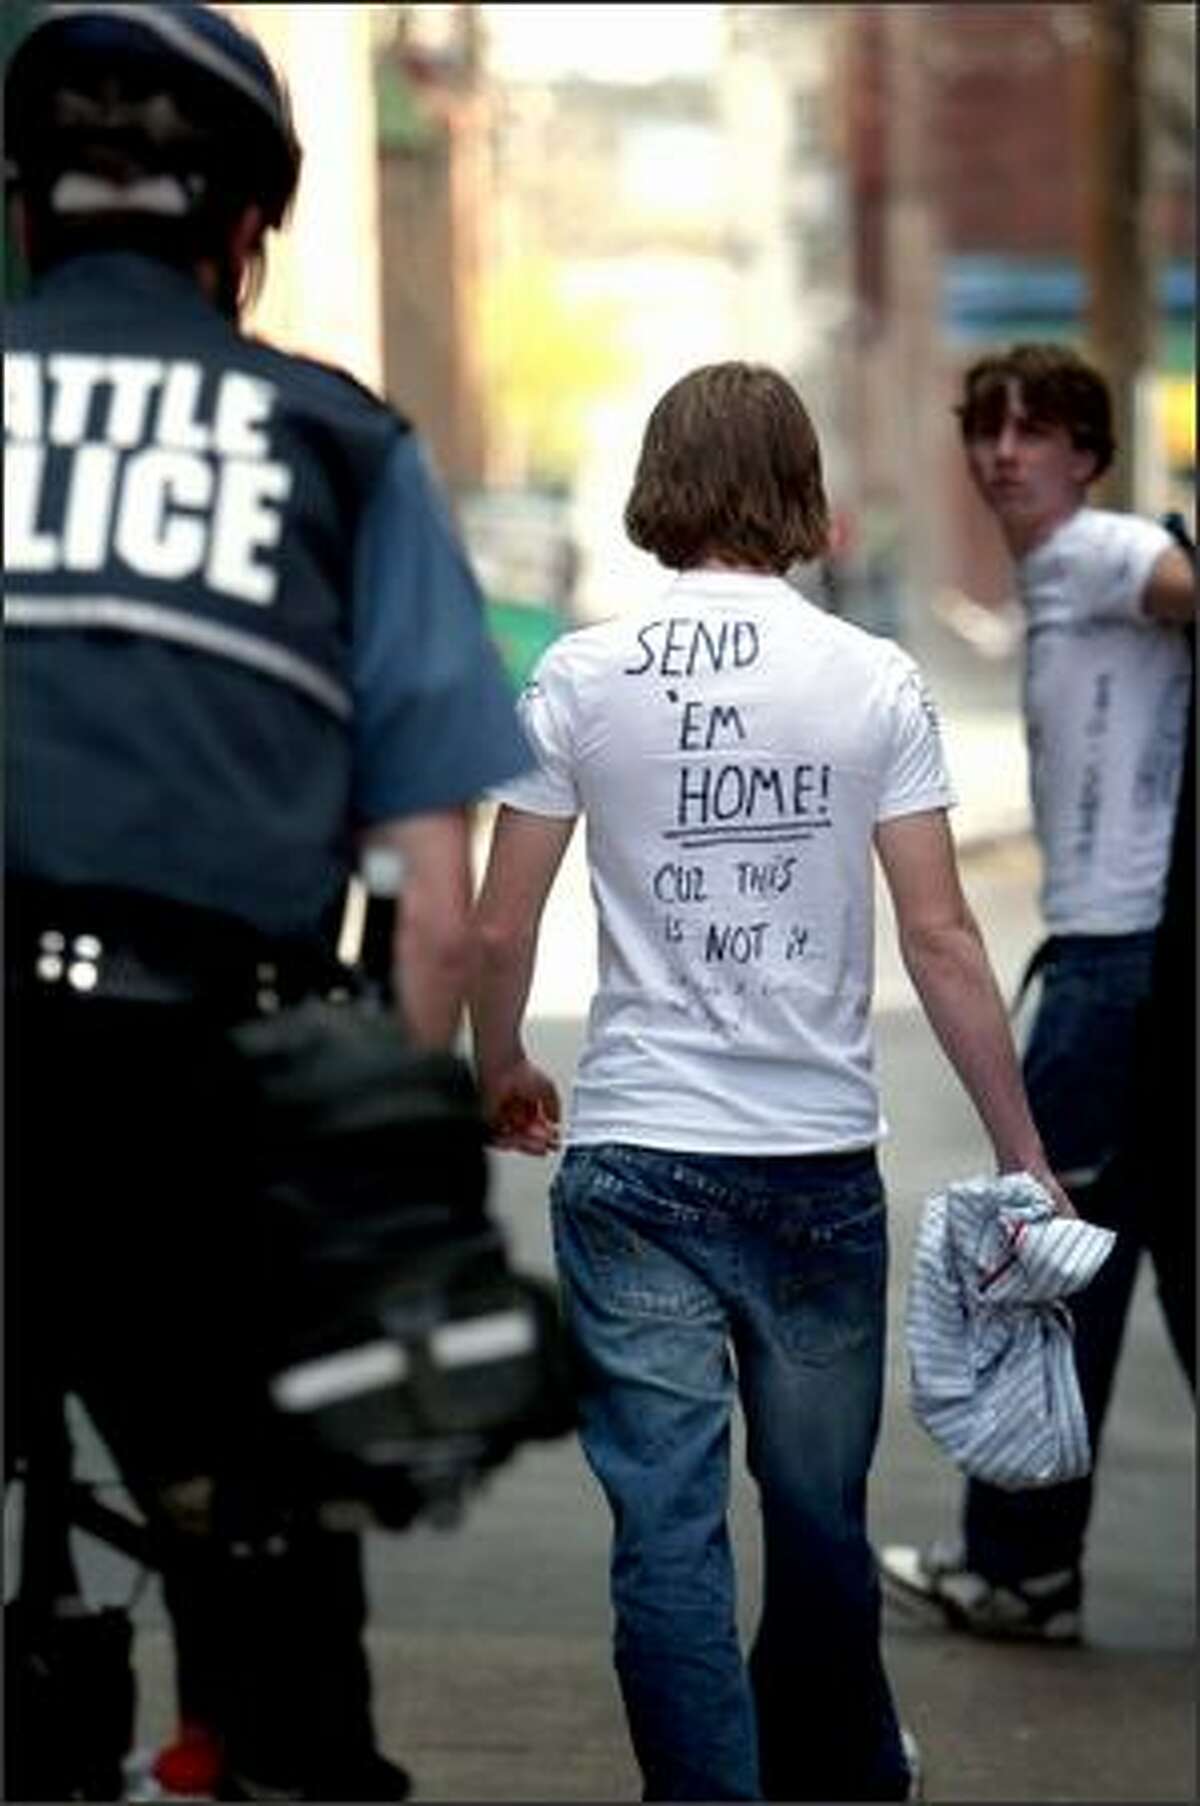 A self described white supremacist is escorted away after attempting to intercept the protest. The back of his T-shirt reads "SEND 'EM HOME! Cuz this is NOT it ... We stole it fair and square!"